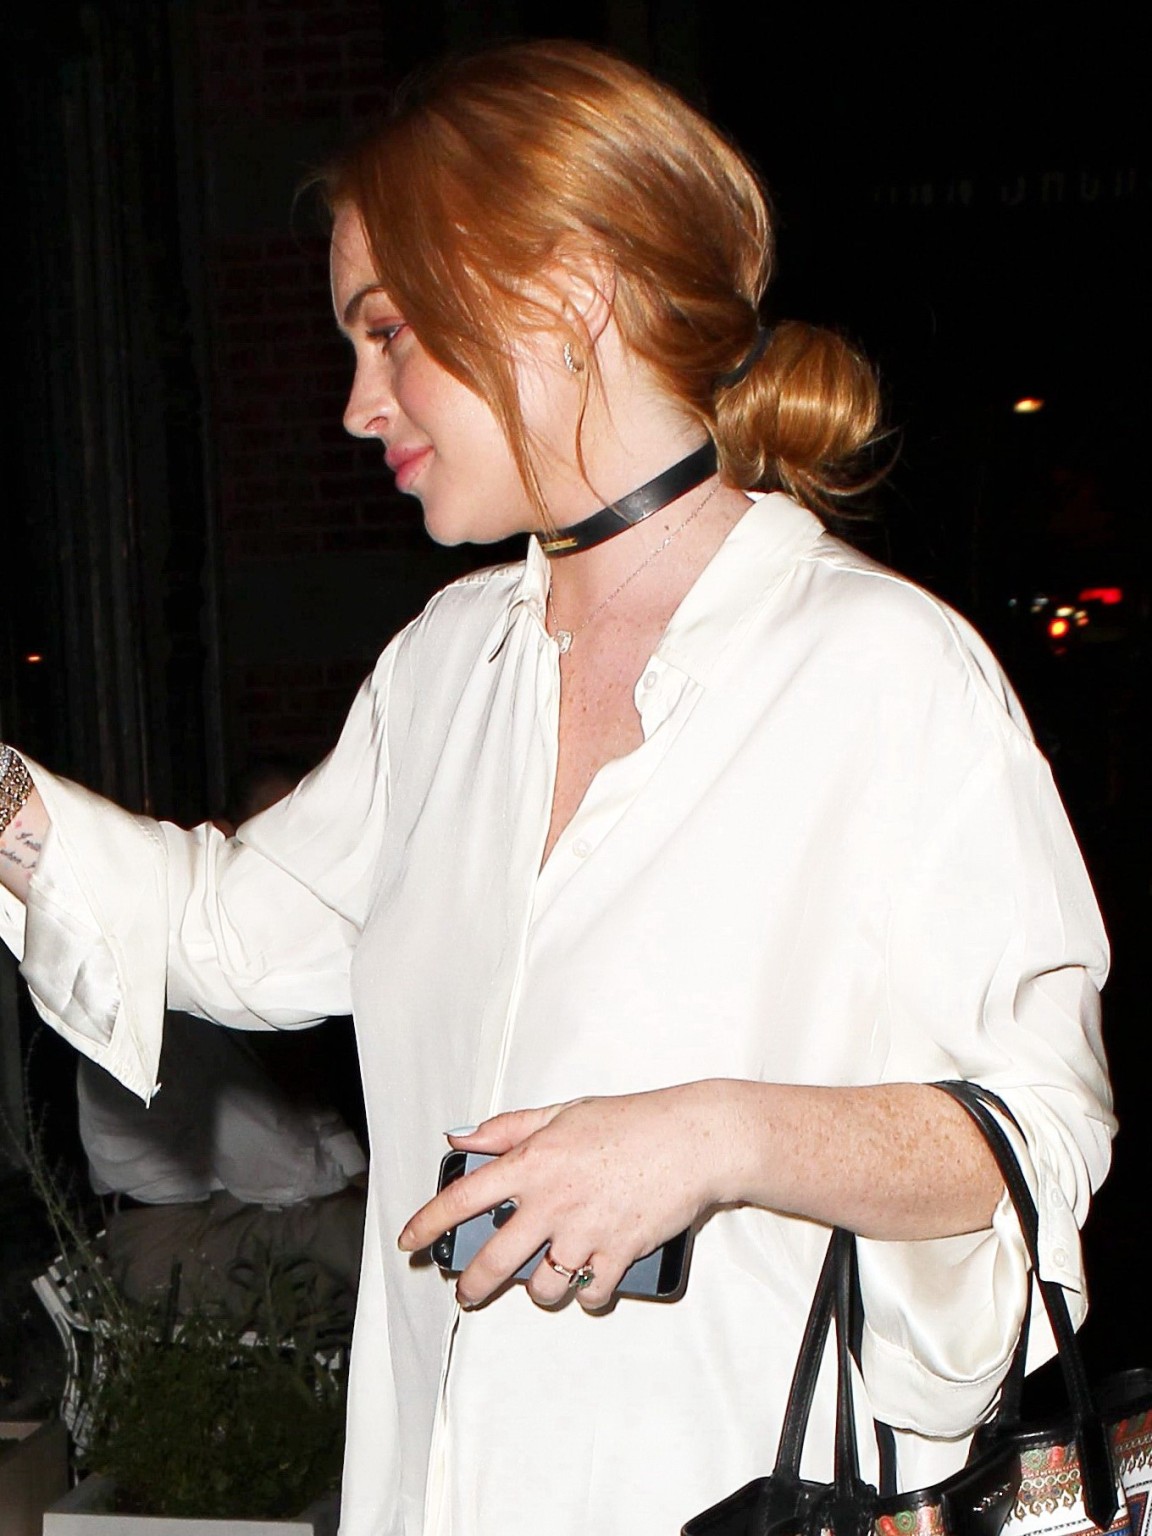 Lindsay Lohan braless wearing a white shirt out in NYC #75220920